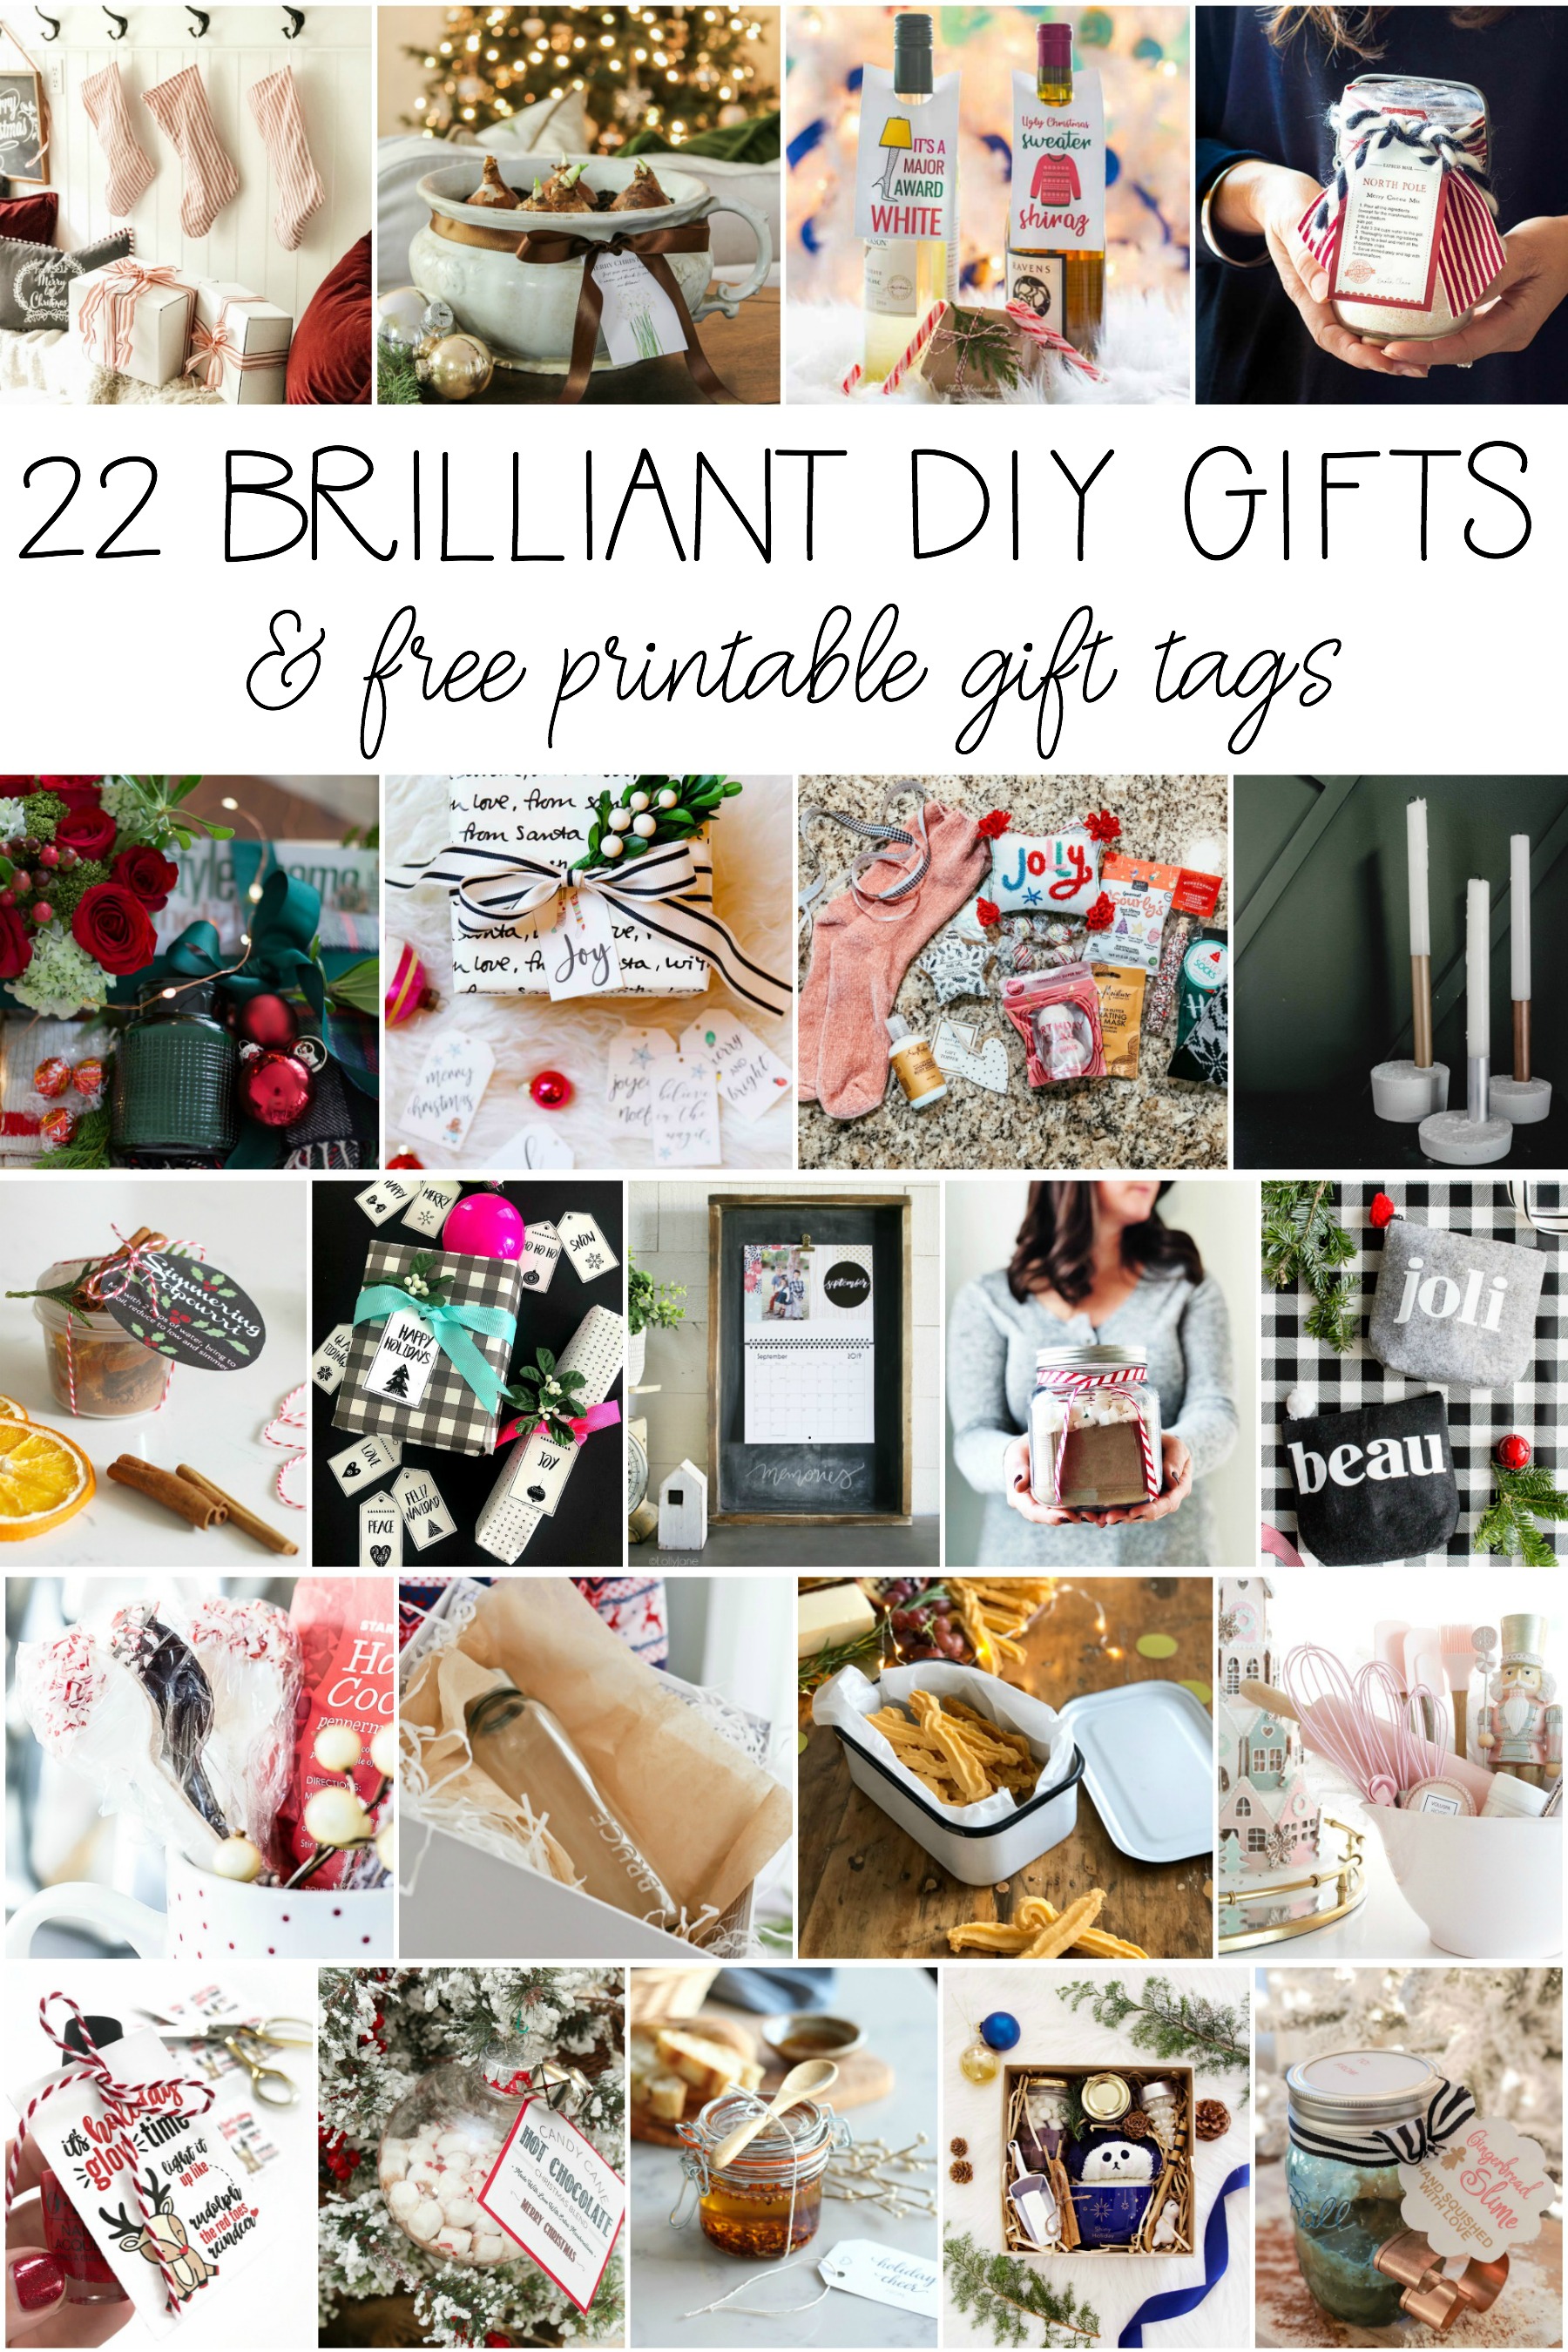 22 Brilliant DIY Gifts and free printable gift tags poster.